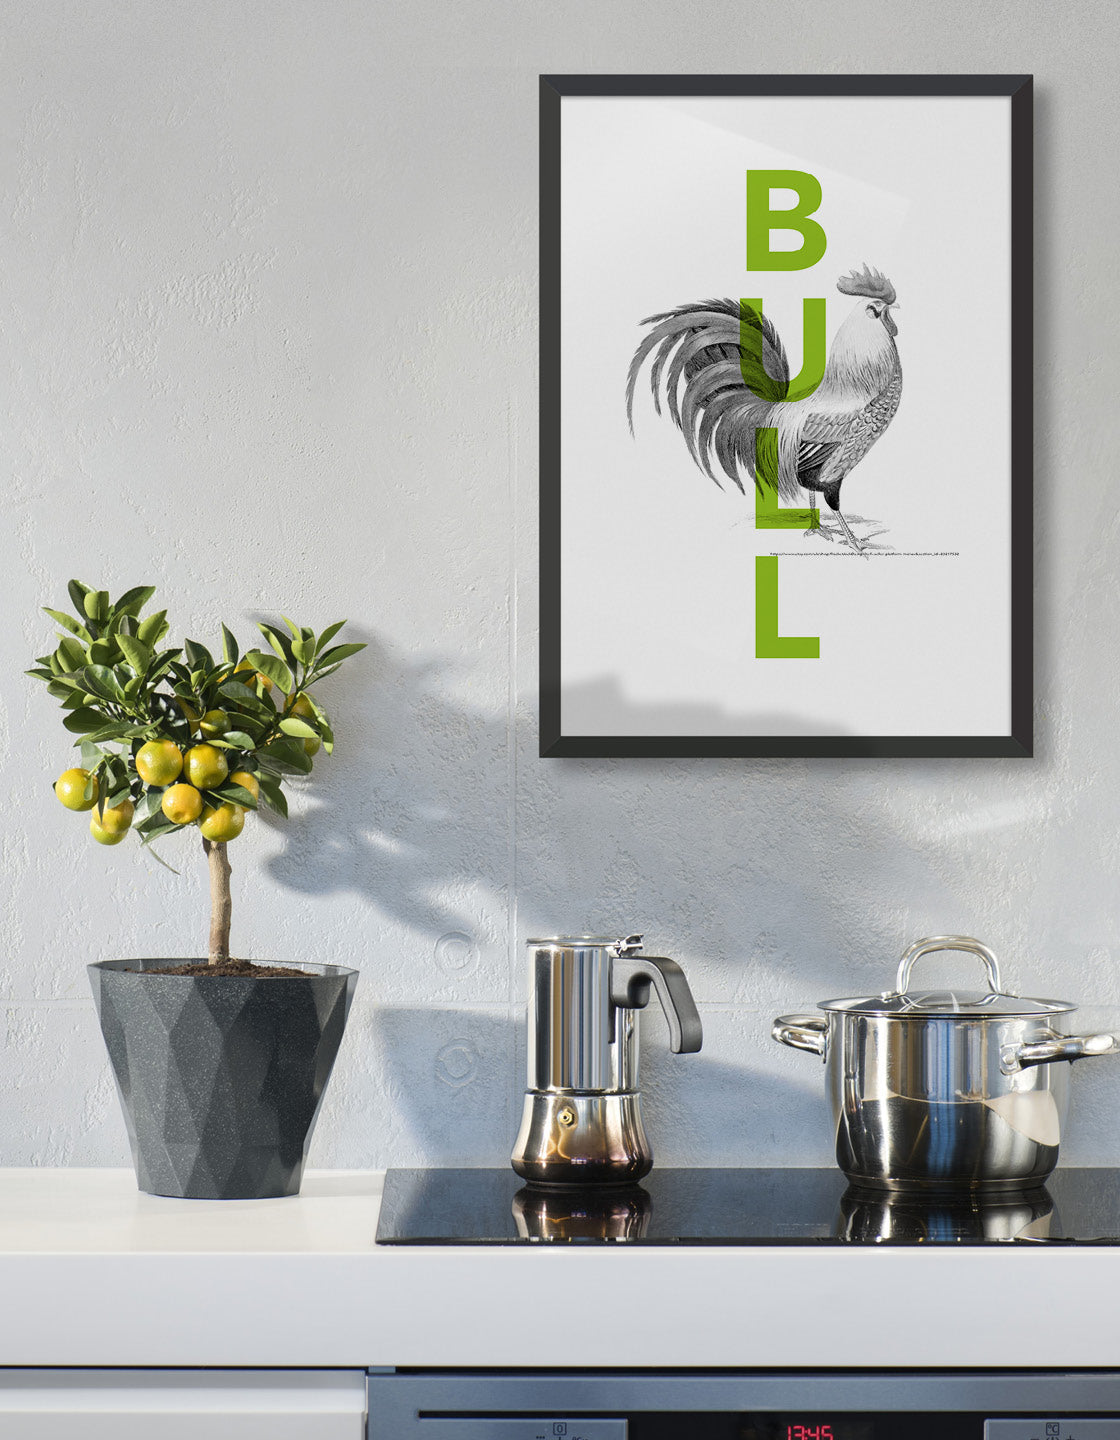 lifestyle image of a kitchen wall featuring cock and bull typography poster - green bull text overlaid on monochrome cock line drawing